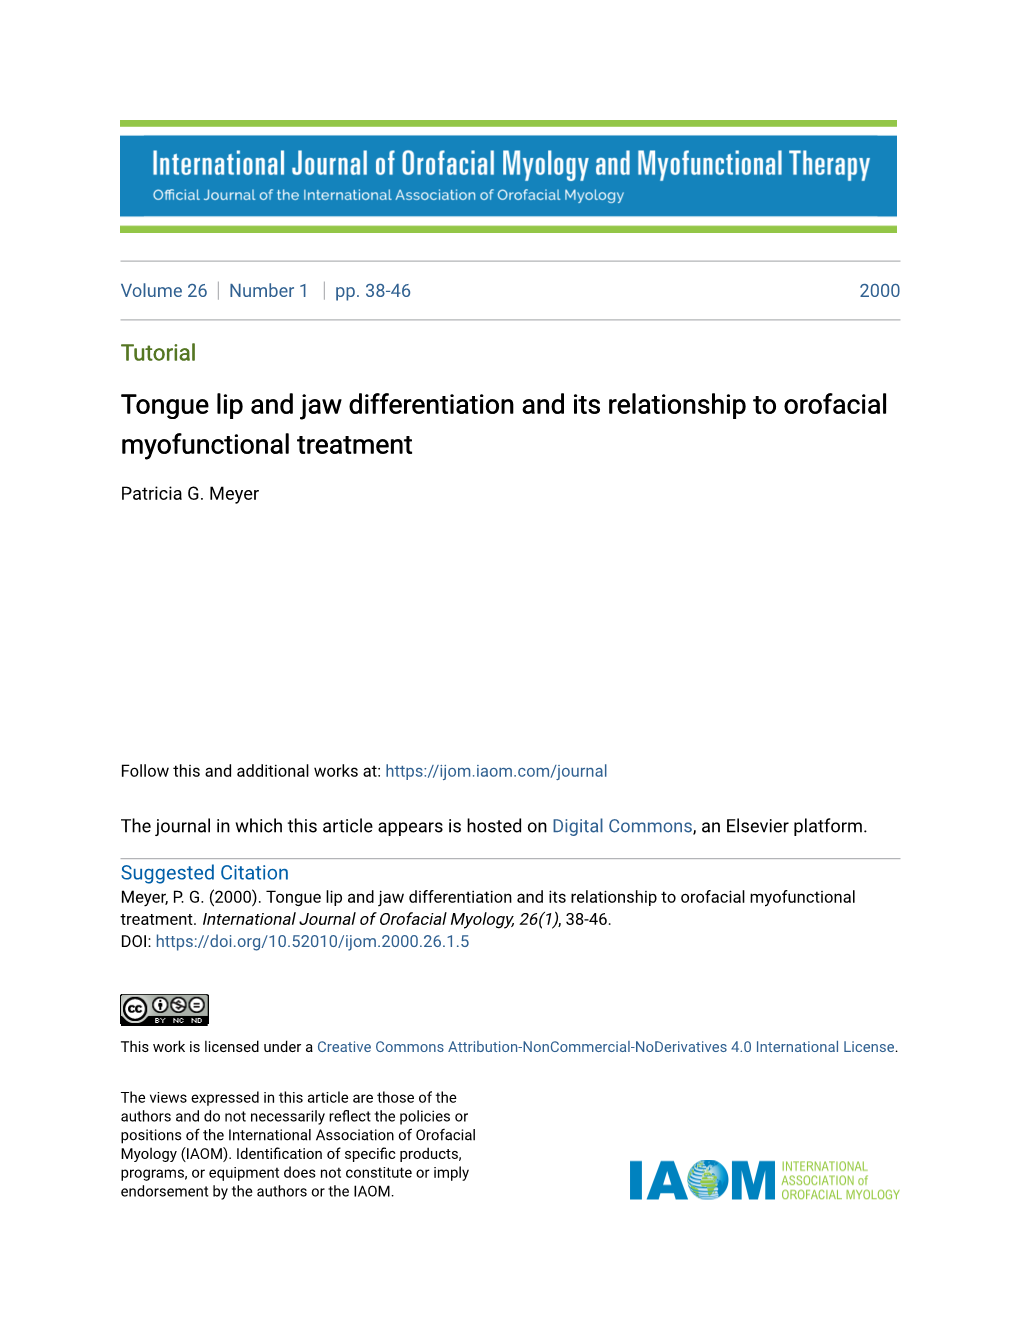 Tongue Lip and Jaw Differentiation and Its Relationship to Orofacial Myofunctional Treatment